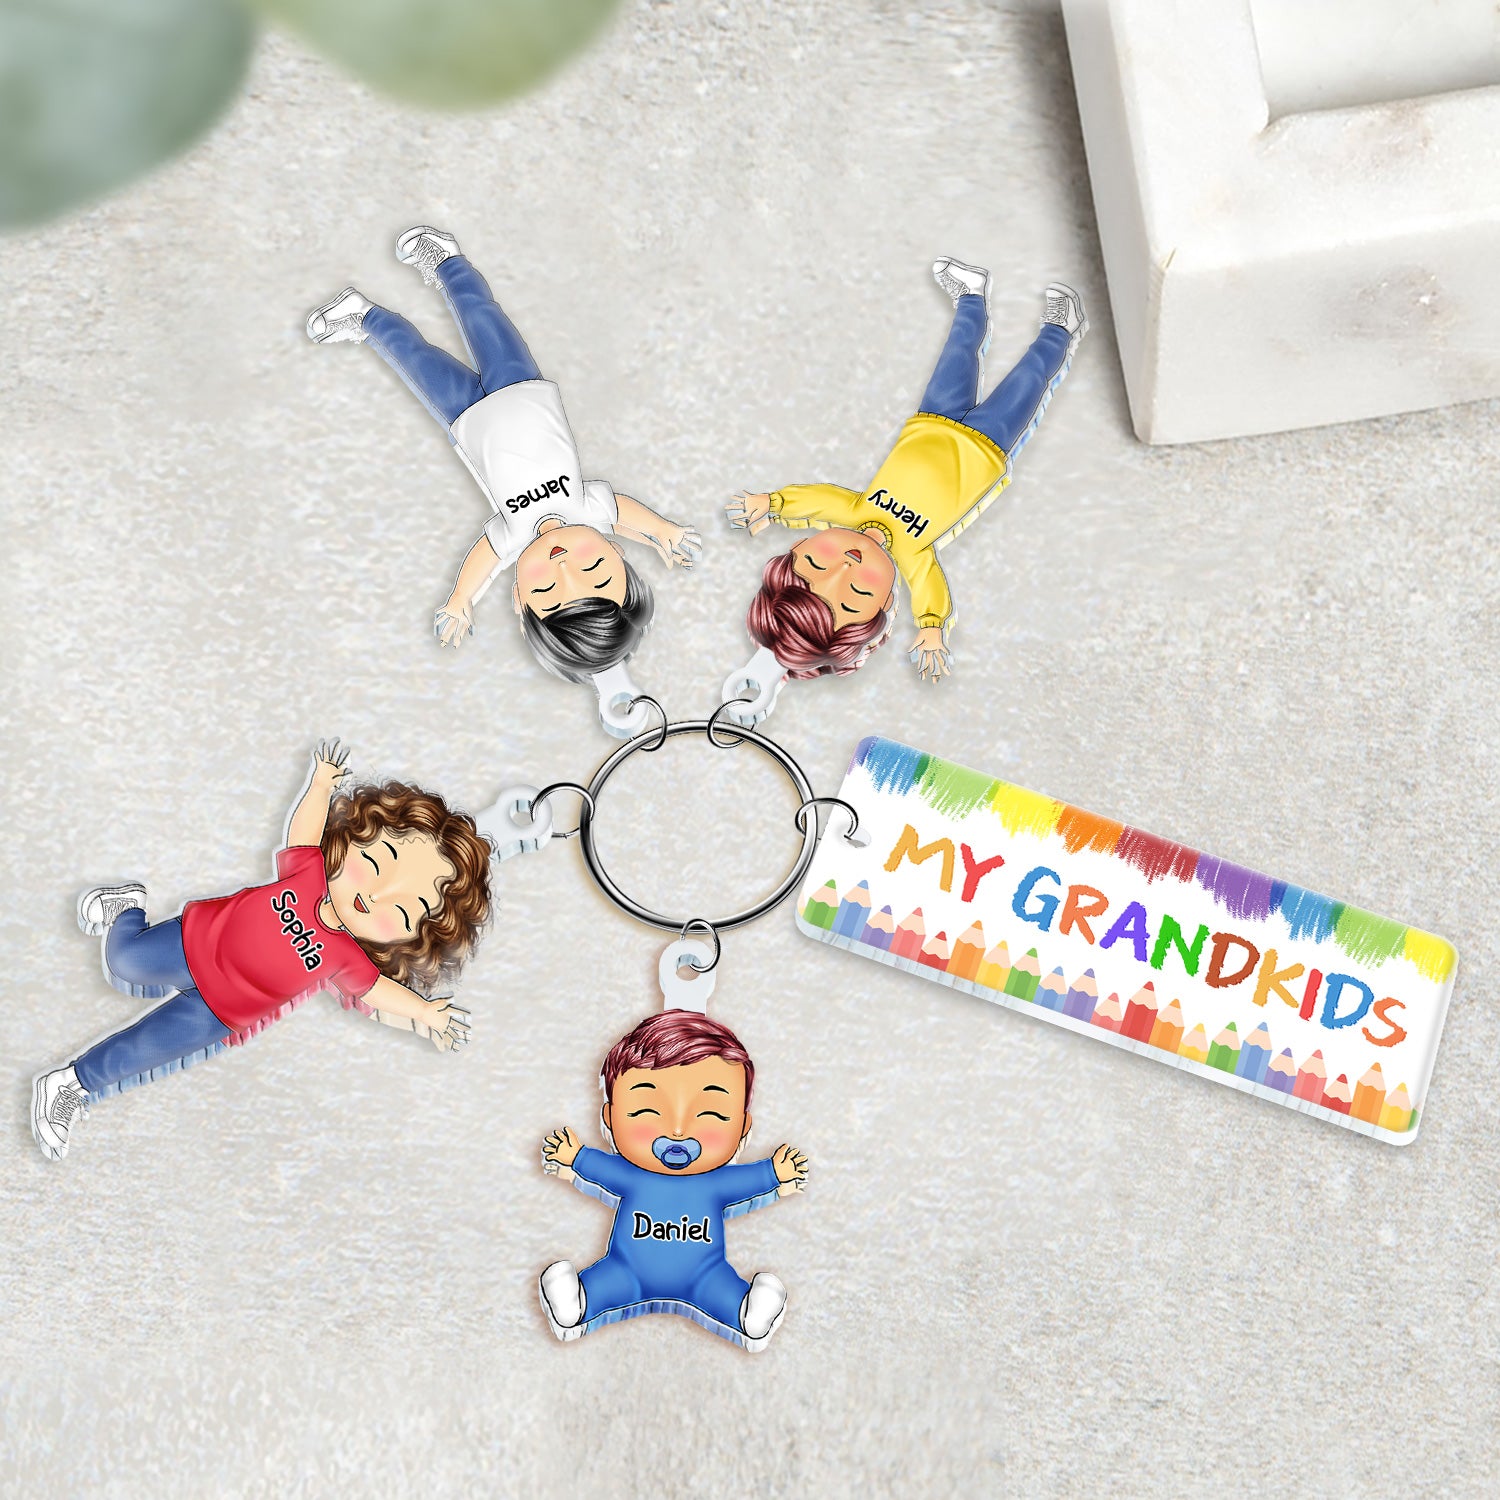 Our Grandkids - Loving Gift For Grandma, Grandparents, Mother - Personalized Acrylic Tag Keychain